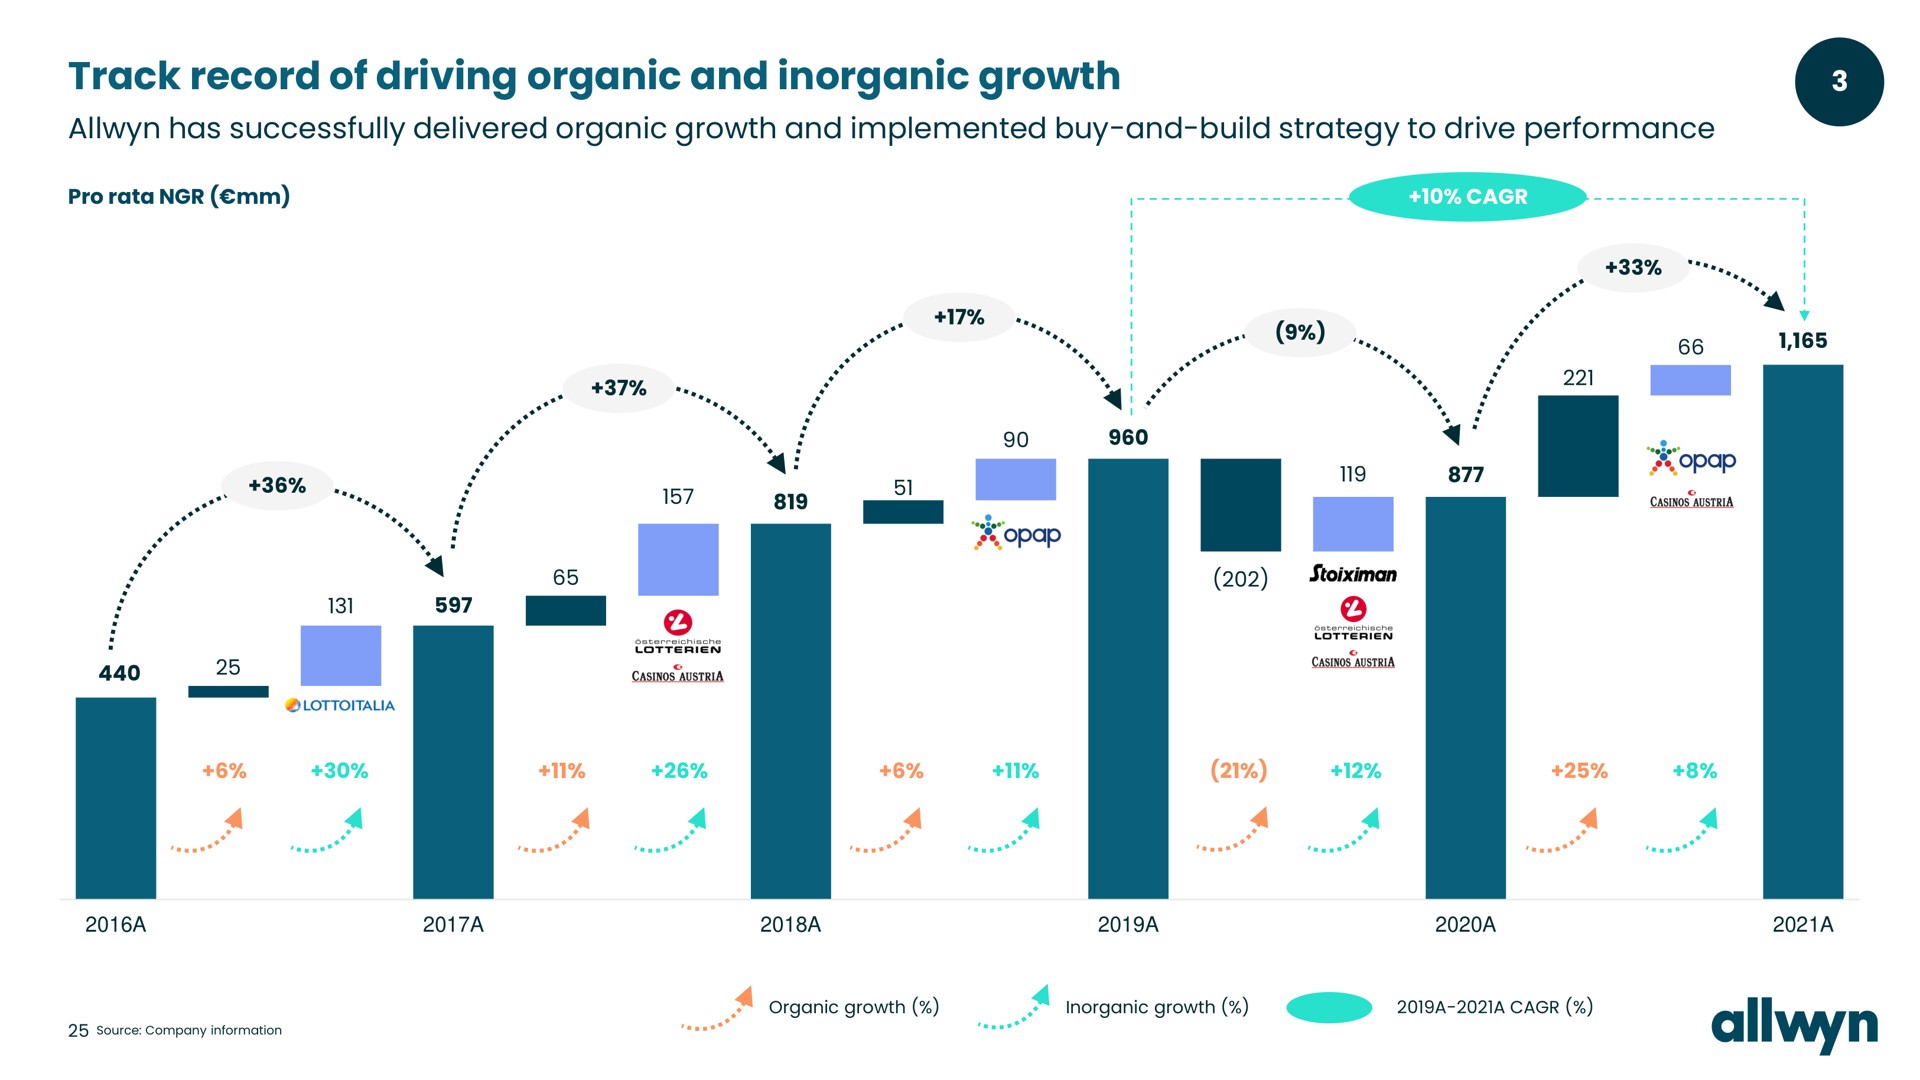 track record of driving organic and inorganic growth has successfully delivered organic growth and implemented buy and build strategy to drive performance | Allwyn